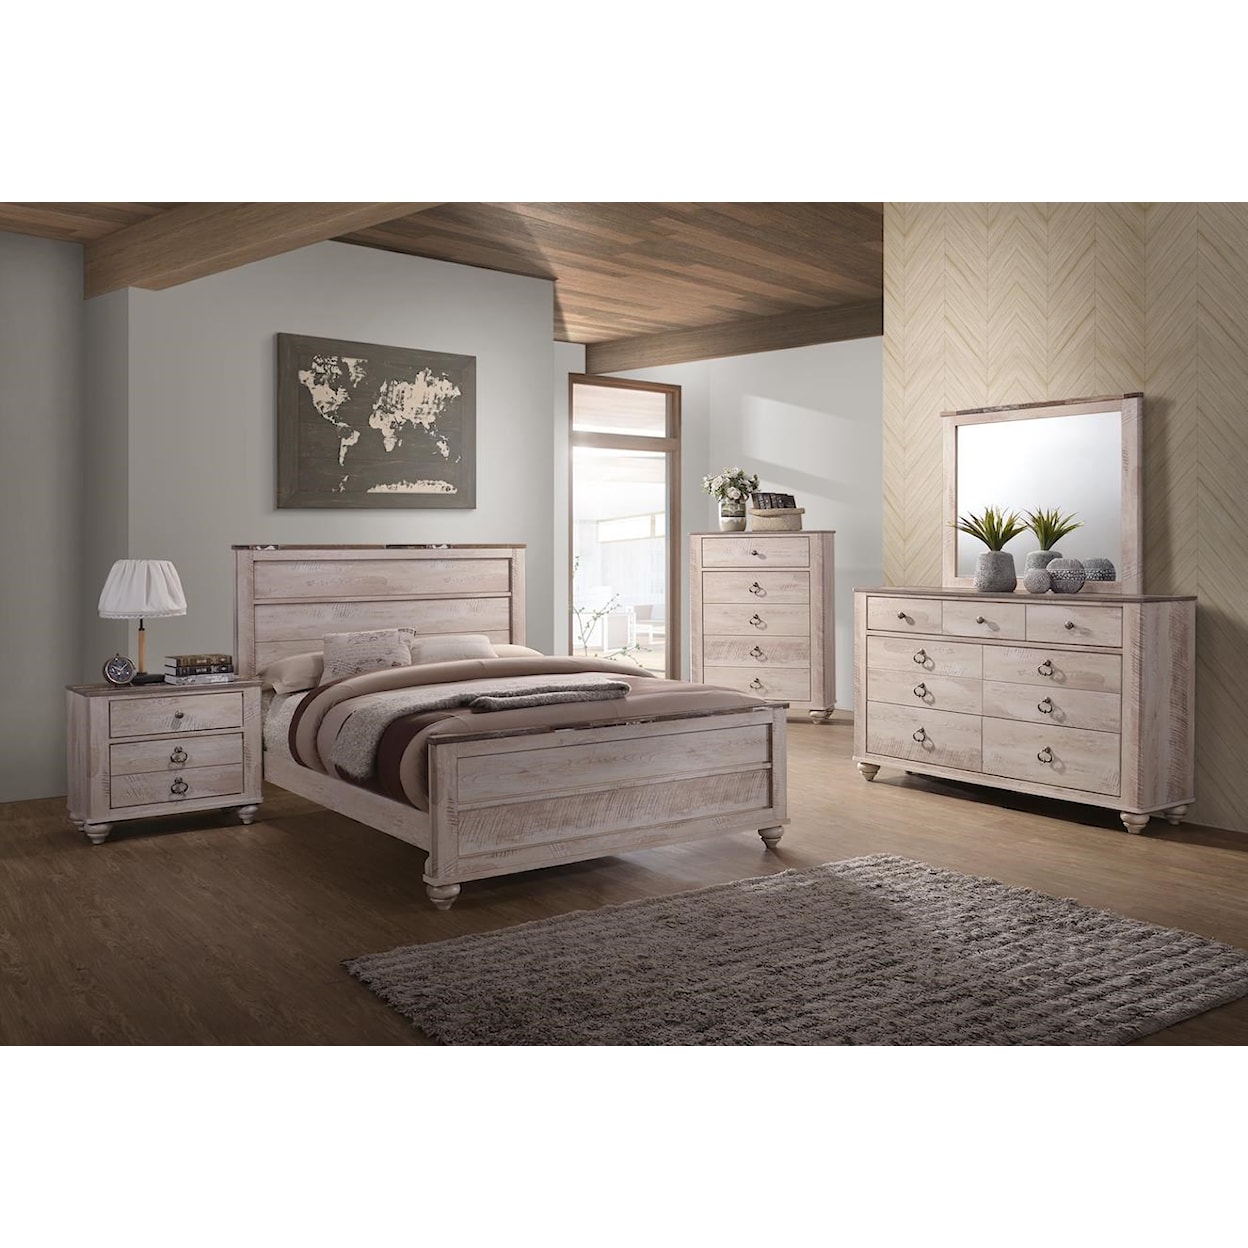 Lifestyle C7302A 6 Piece Queen Bedroom Group